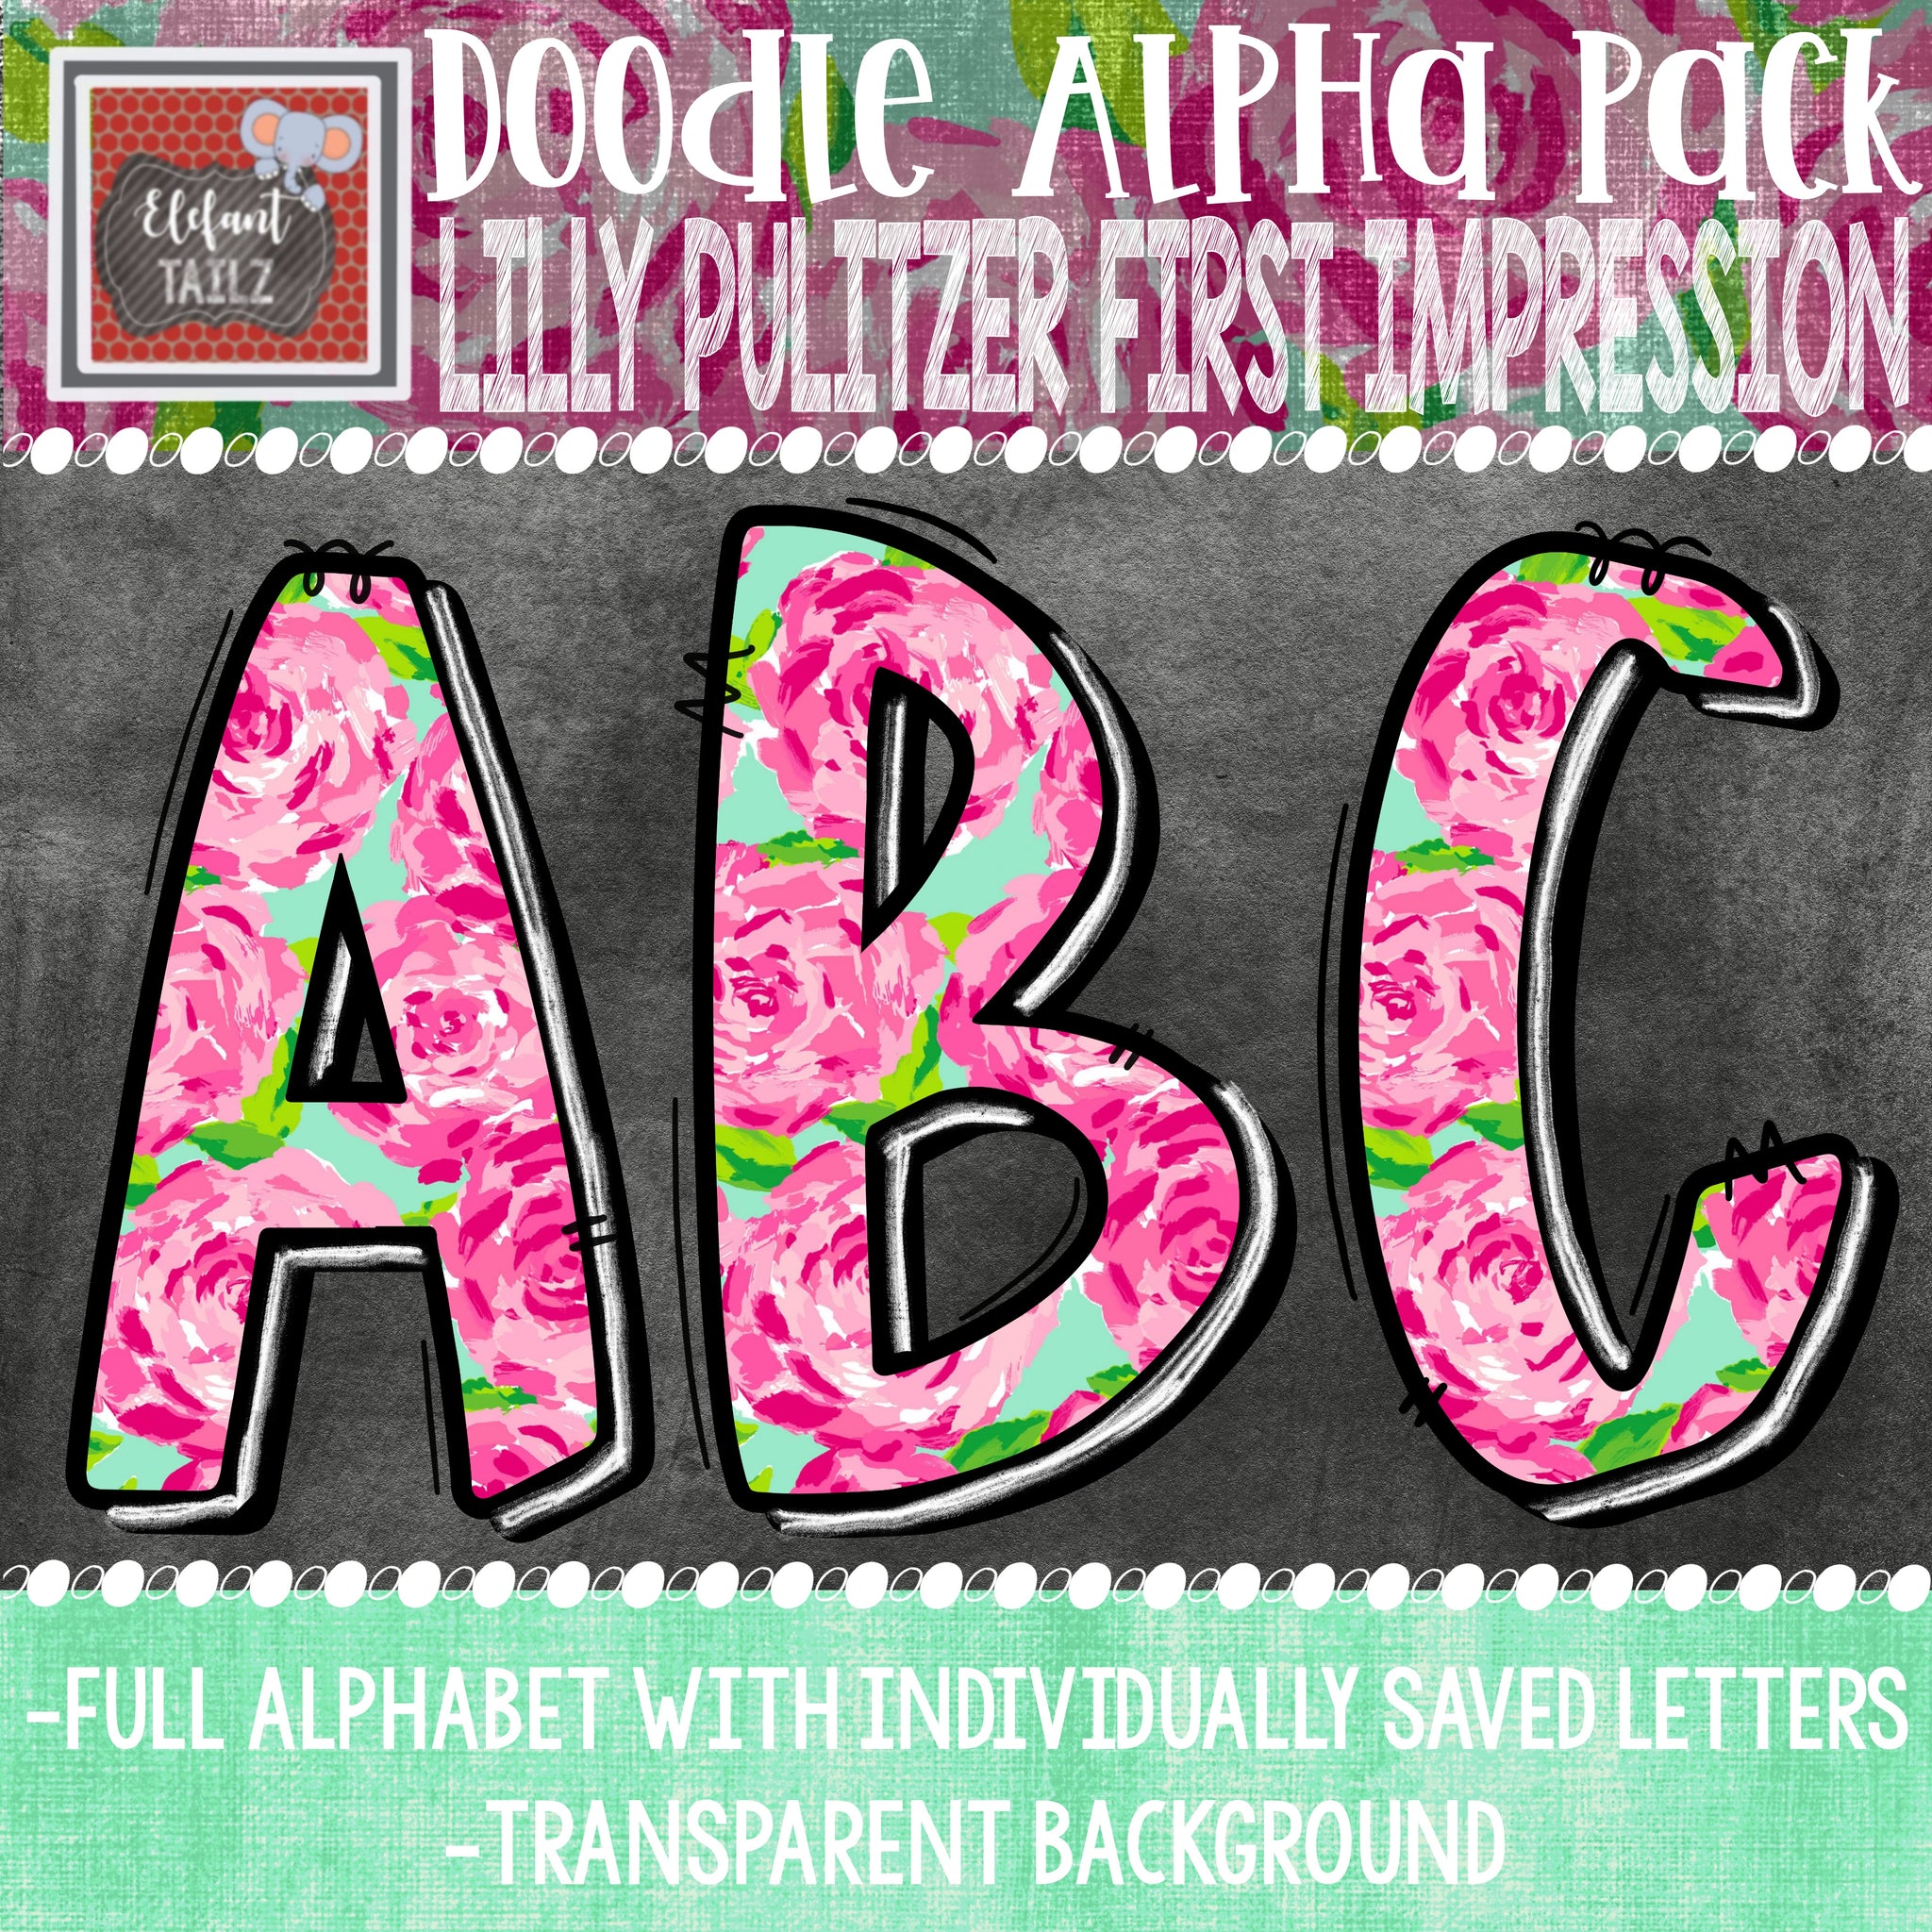 Doodle Alpha - Lilly Pulitzer First Impression